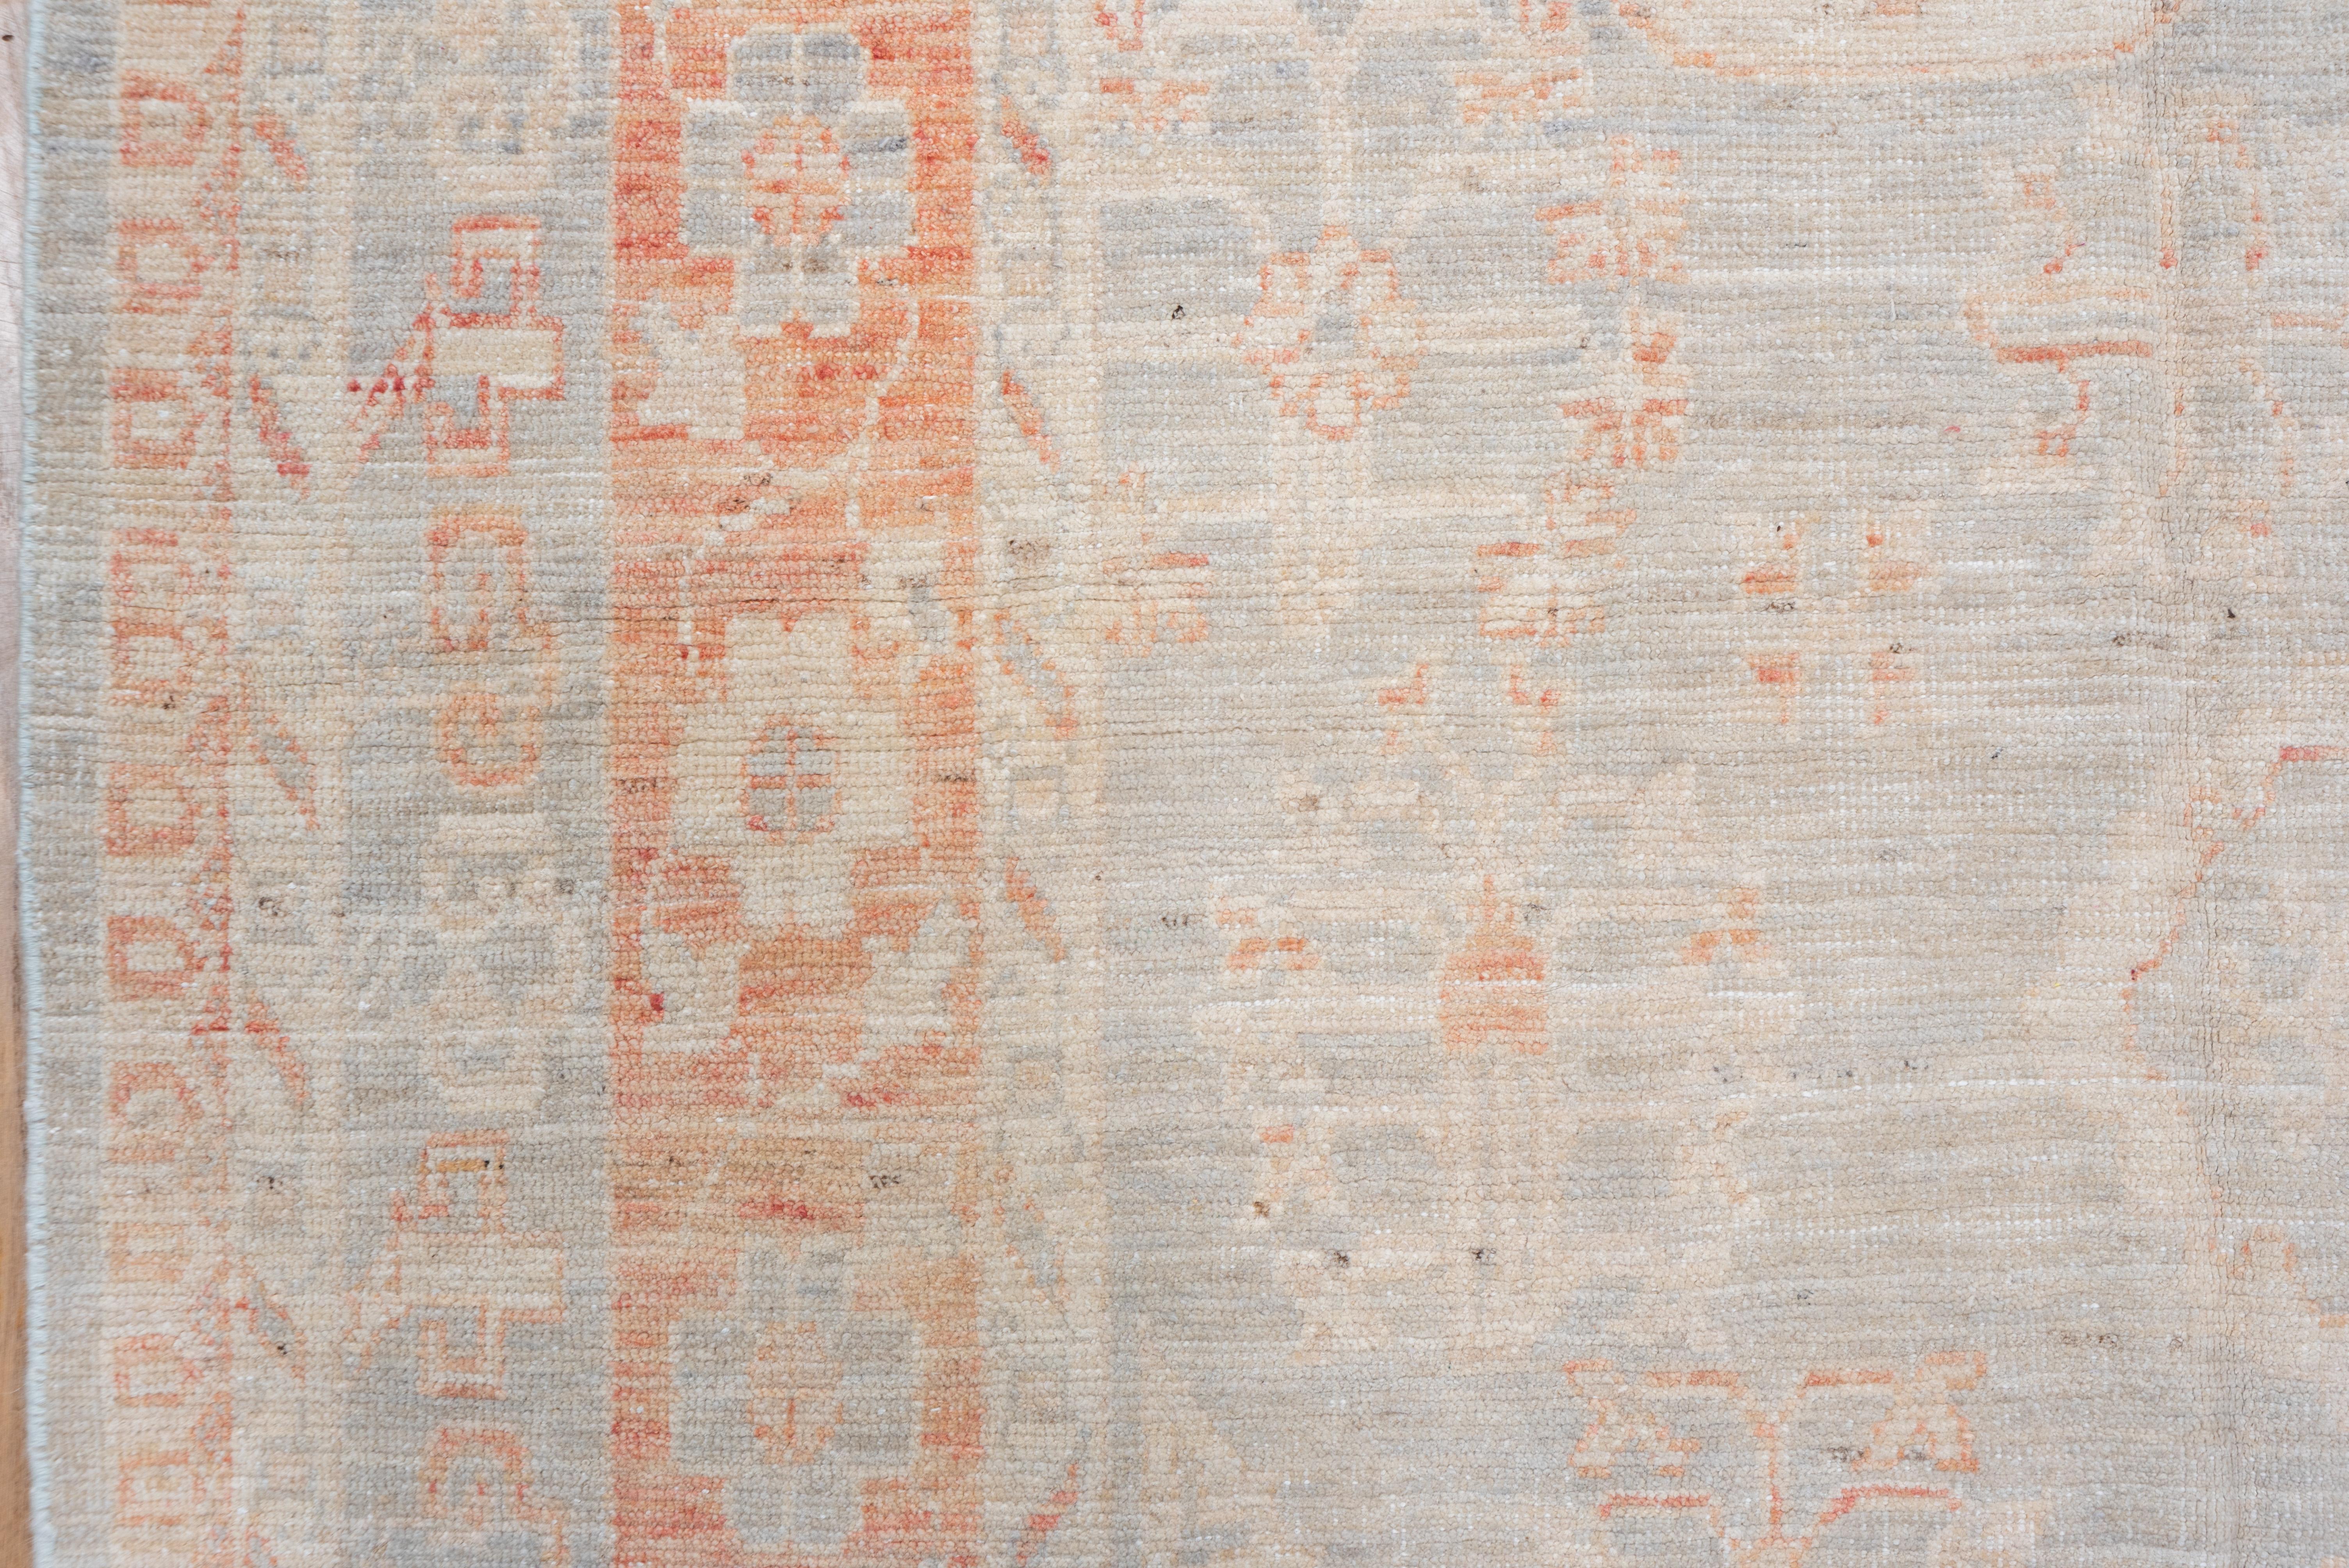 Contemporary Hand Knotted Light Gray Khotan Design Rug, Salmon Colored Borders